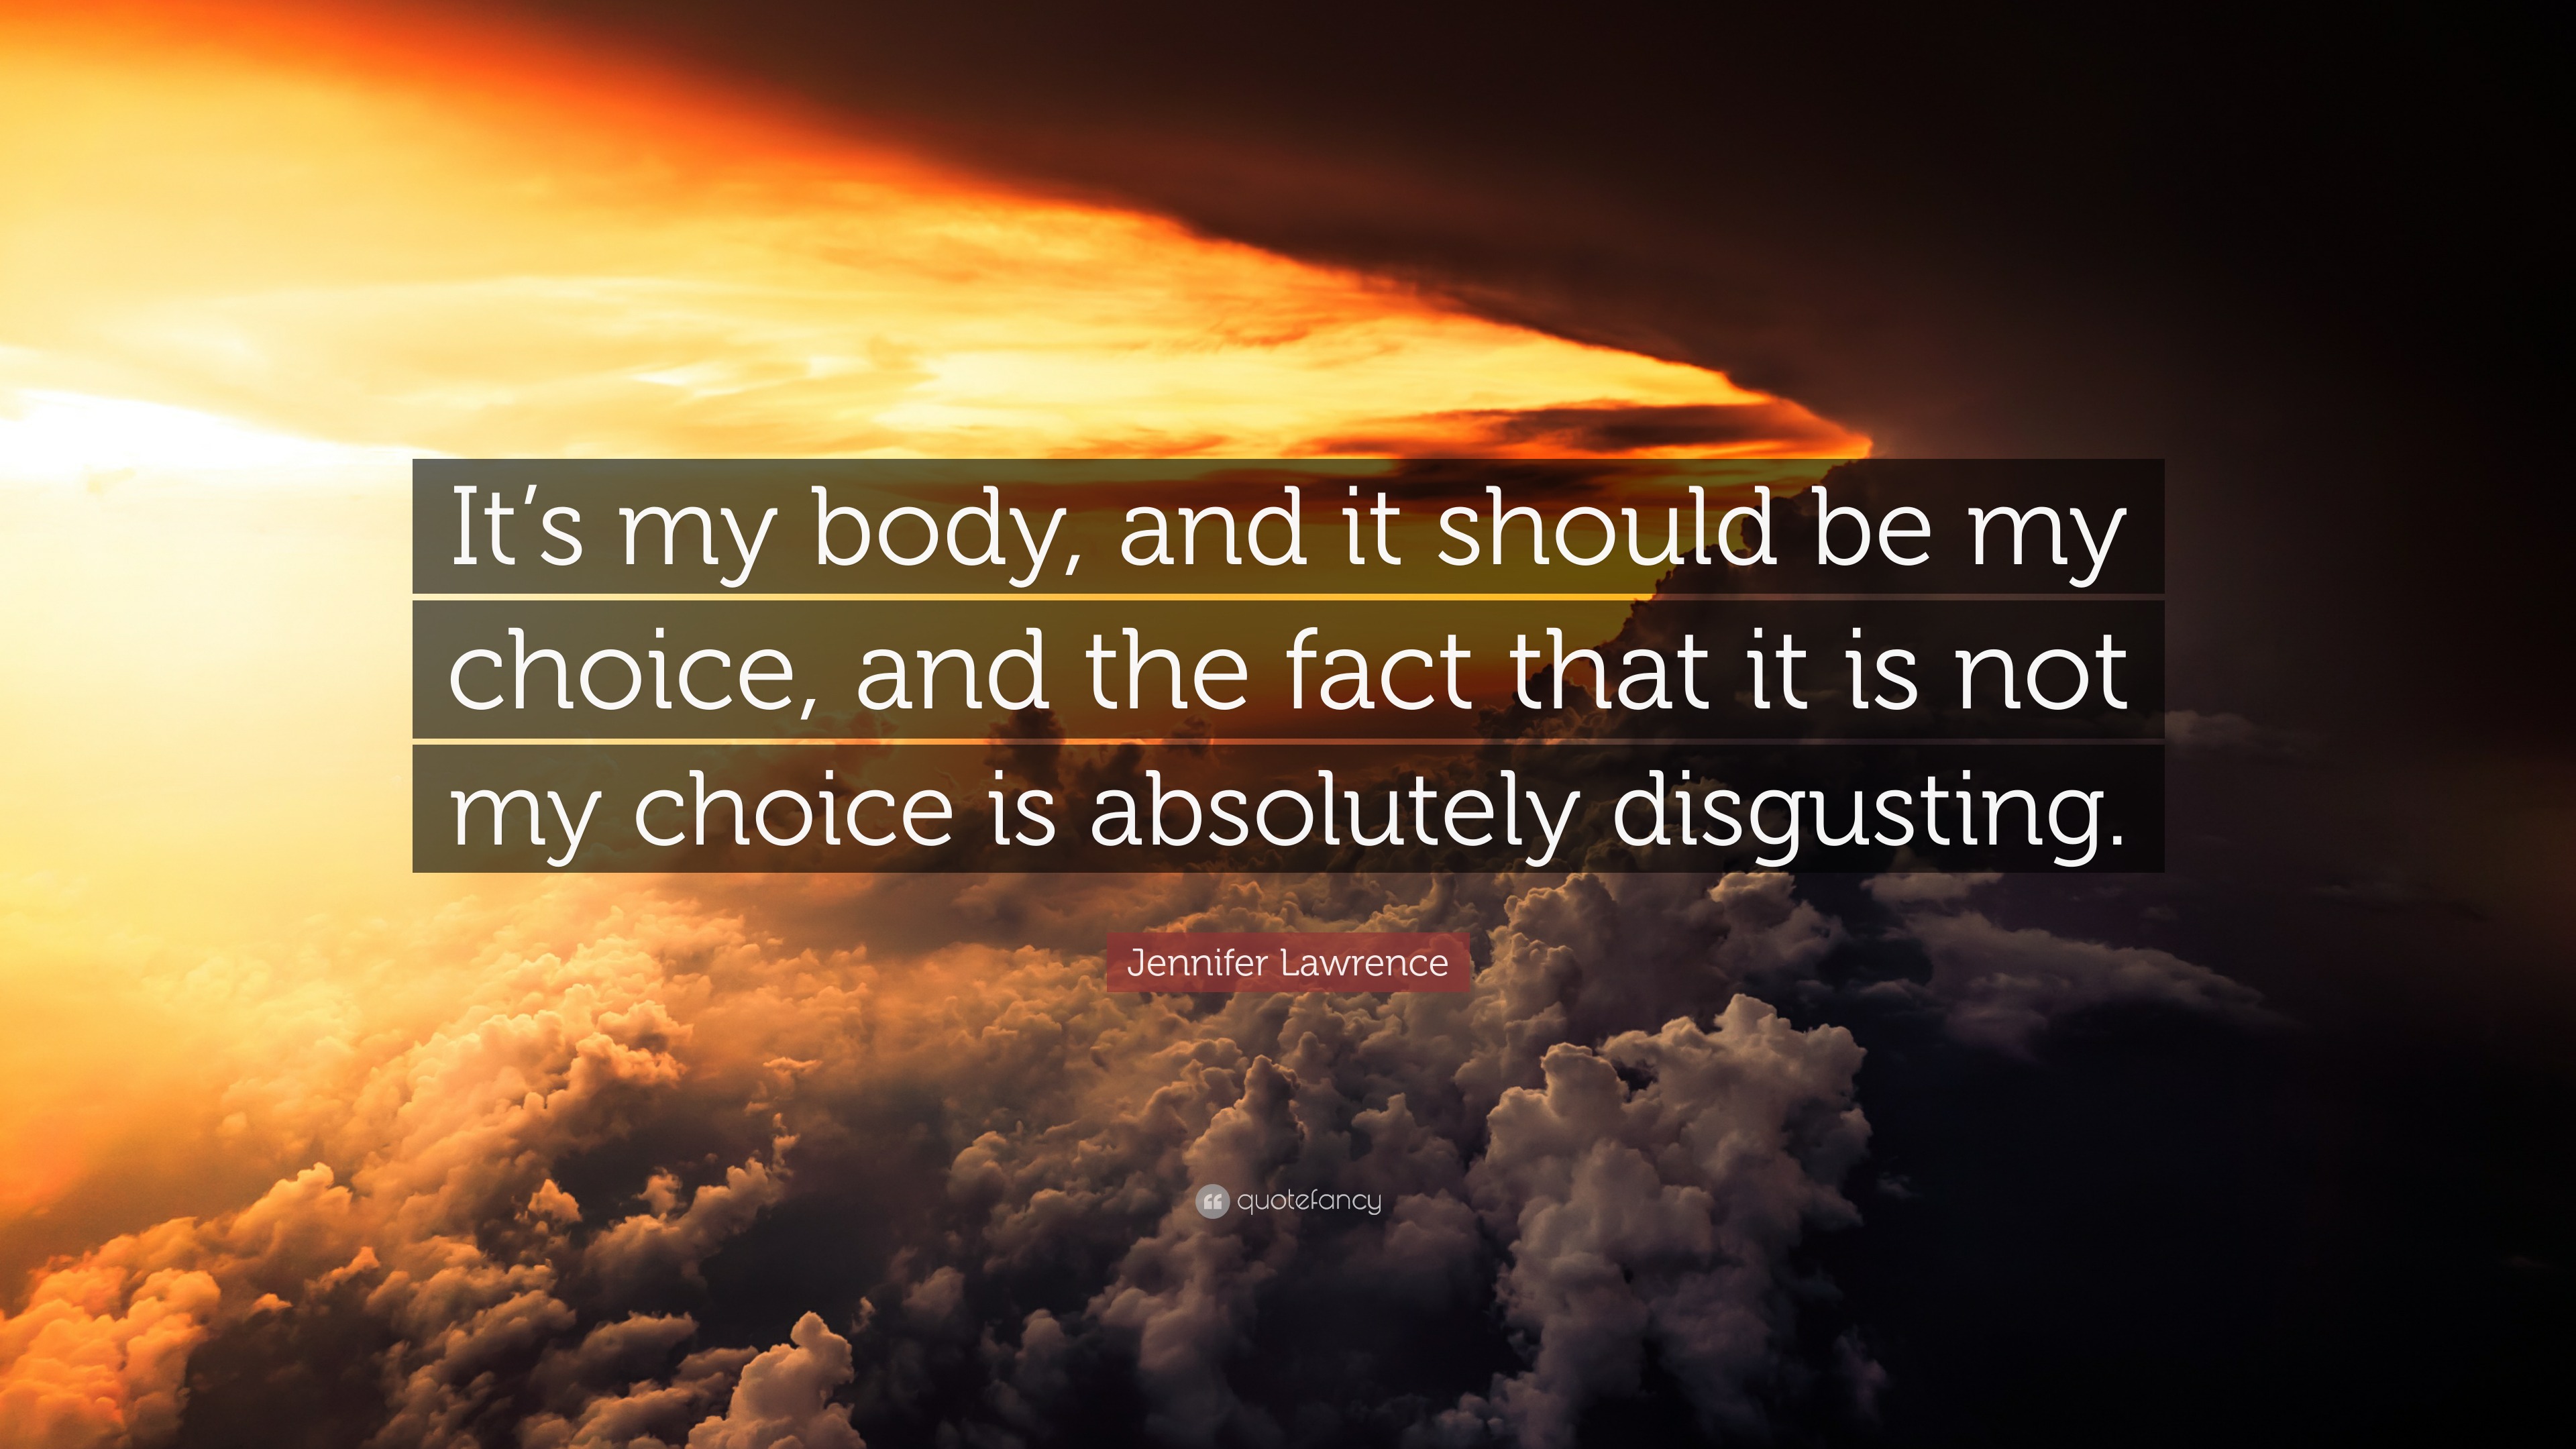 Jennifer Lawrence Quote Its my body and it should be my choice and the  fact that